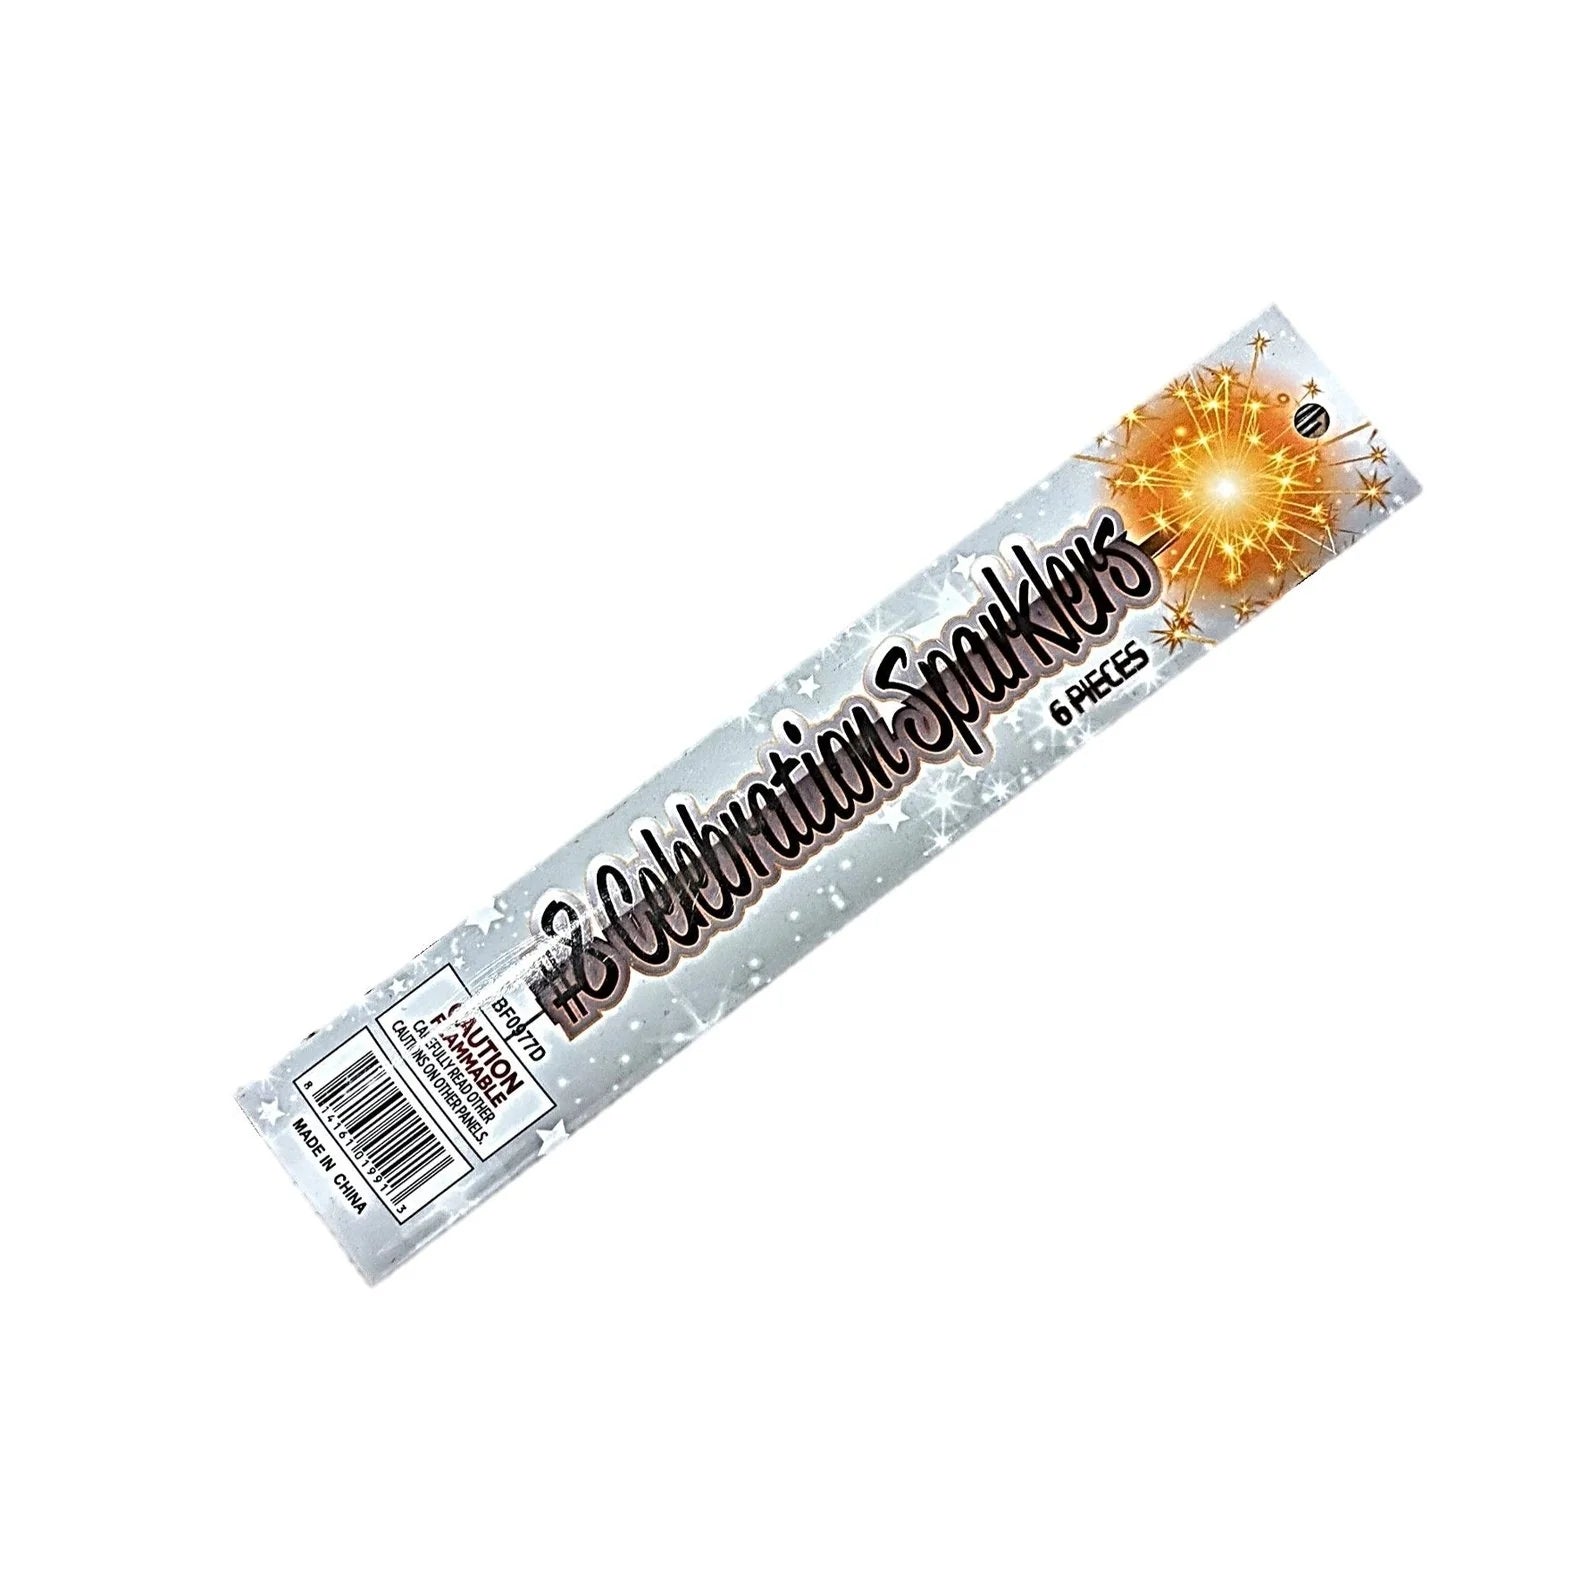 6 Piece 8 Inch Gold Sparklers - 1 Pack of 6 Sparklers